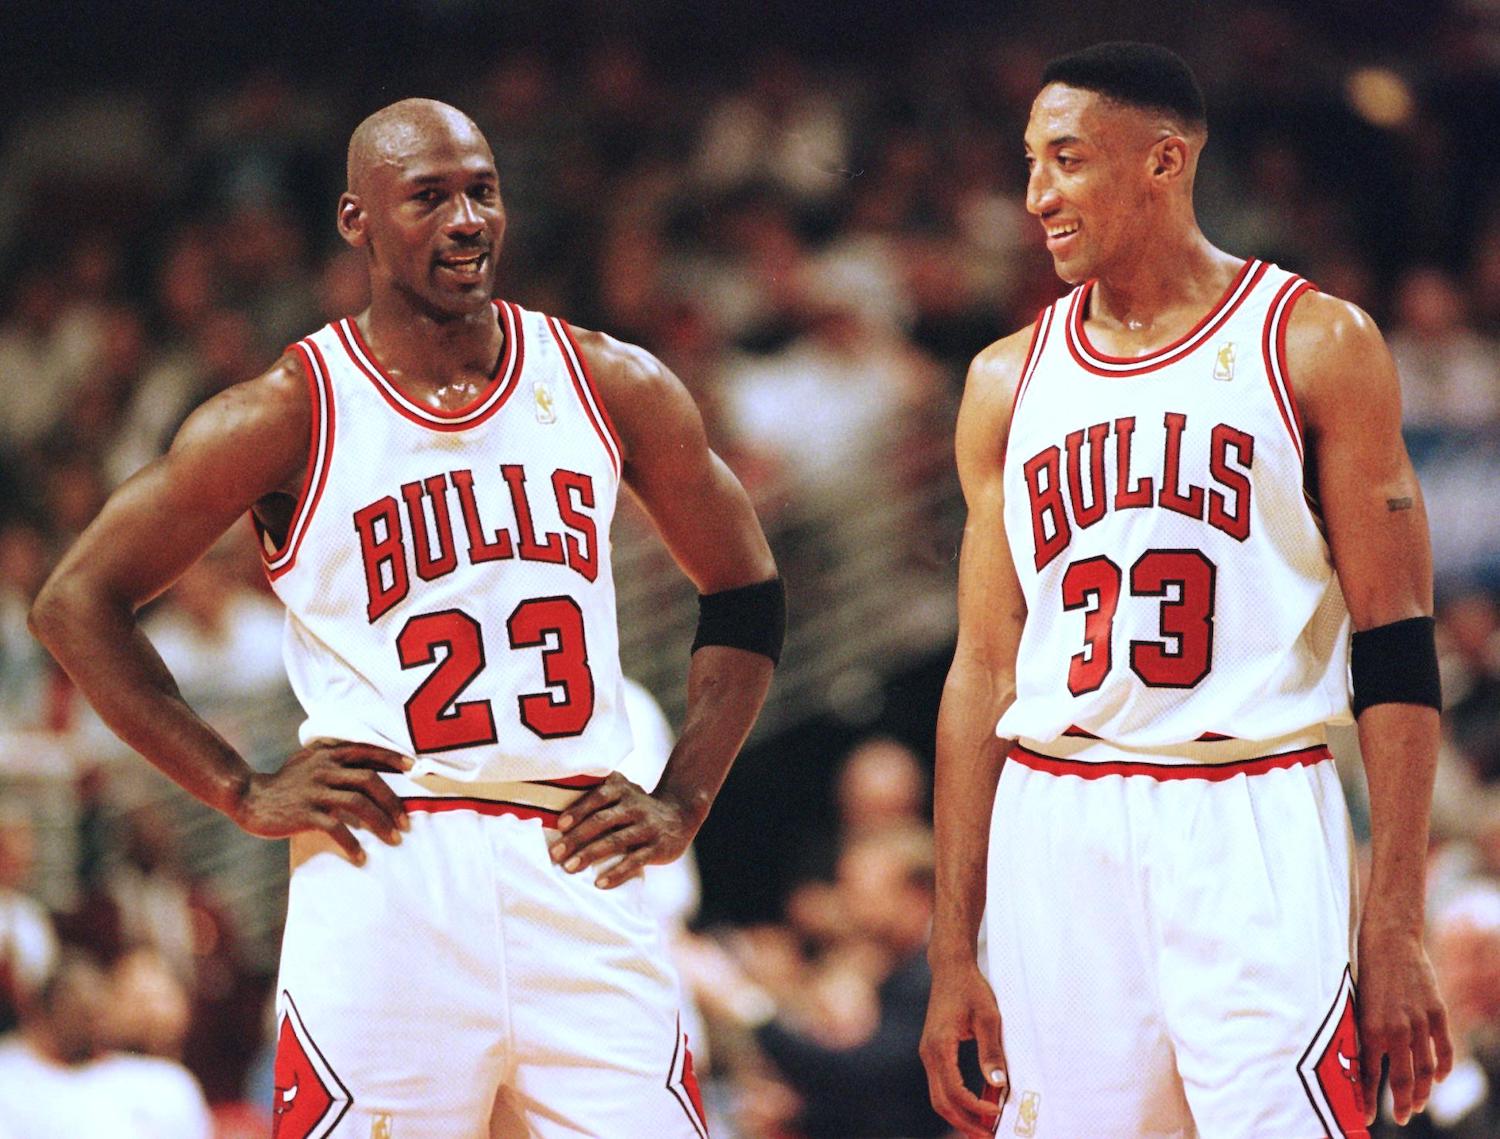 Michael Jordan (L) and Scottie Pippen (R) on the court as members of the Chicago Bulls.